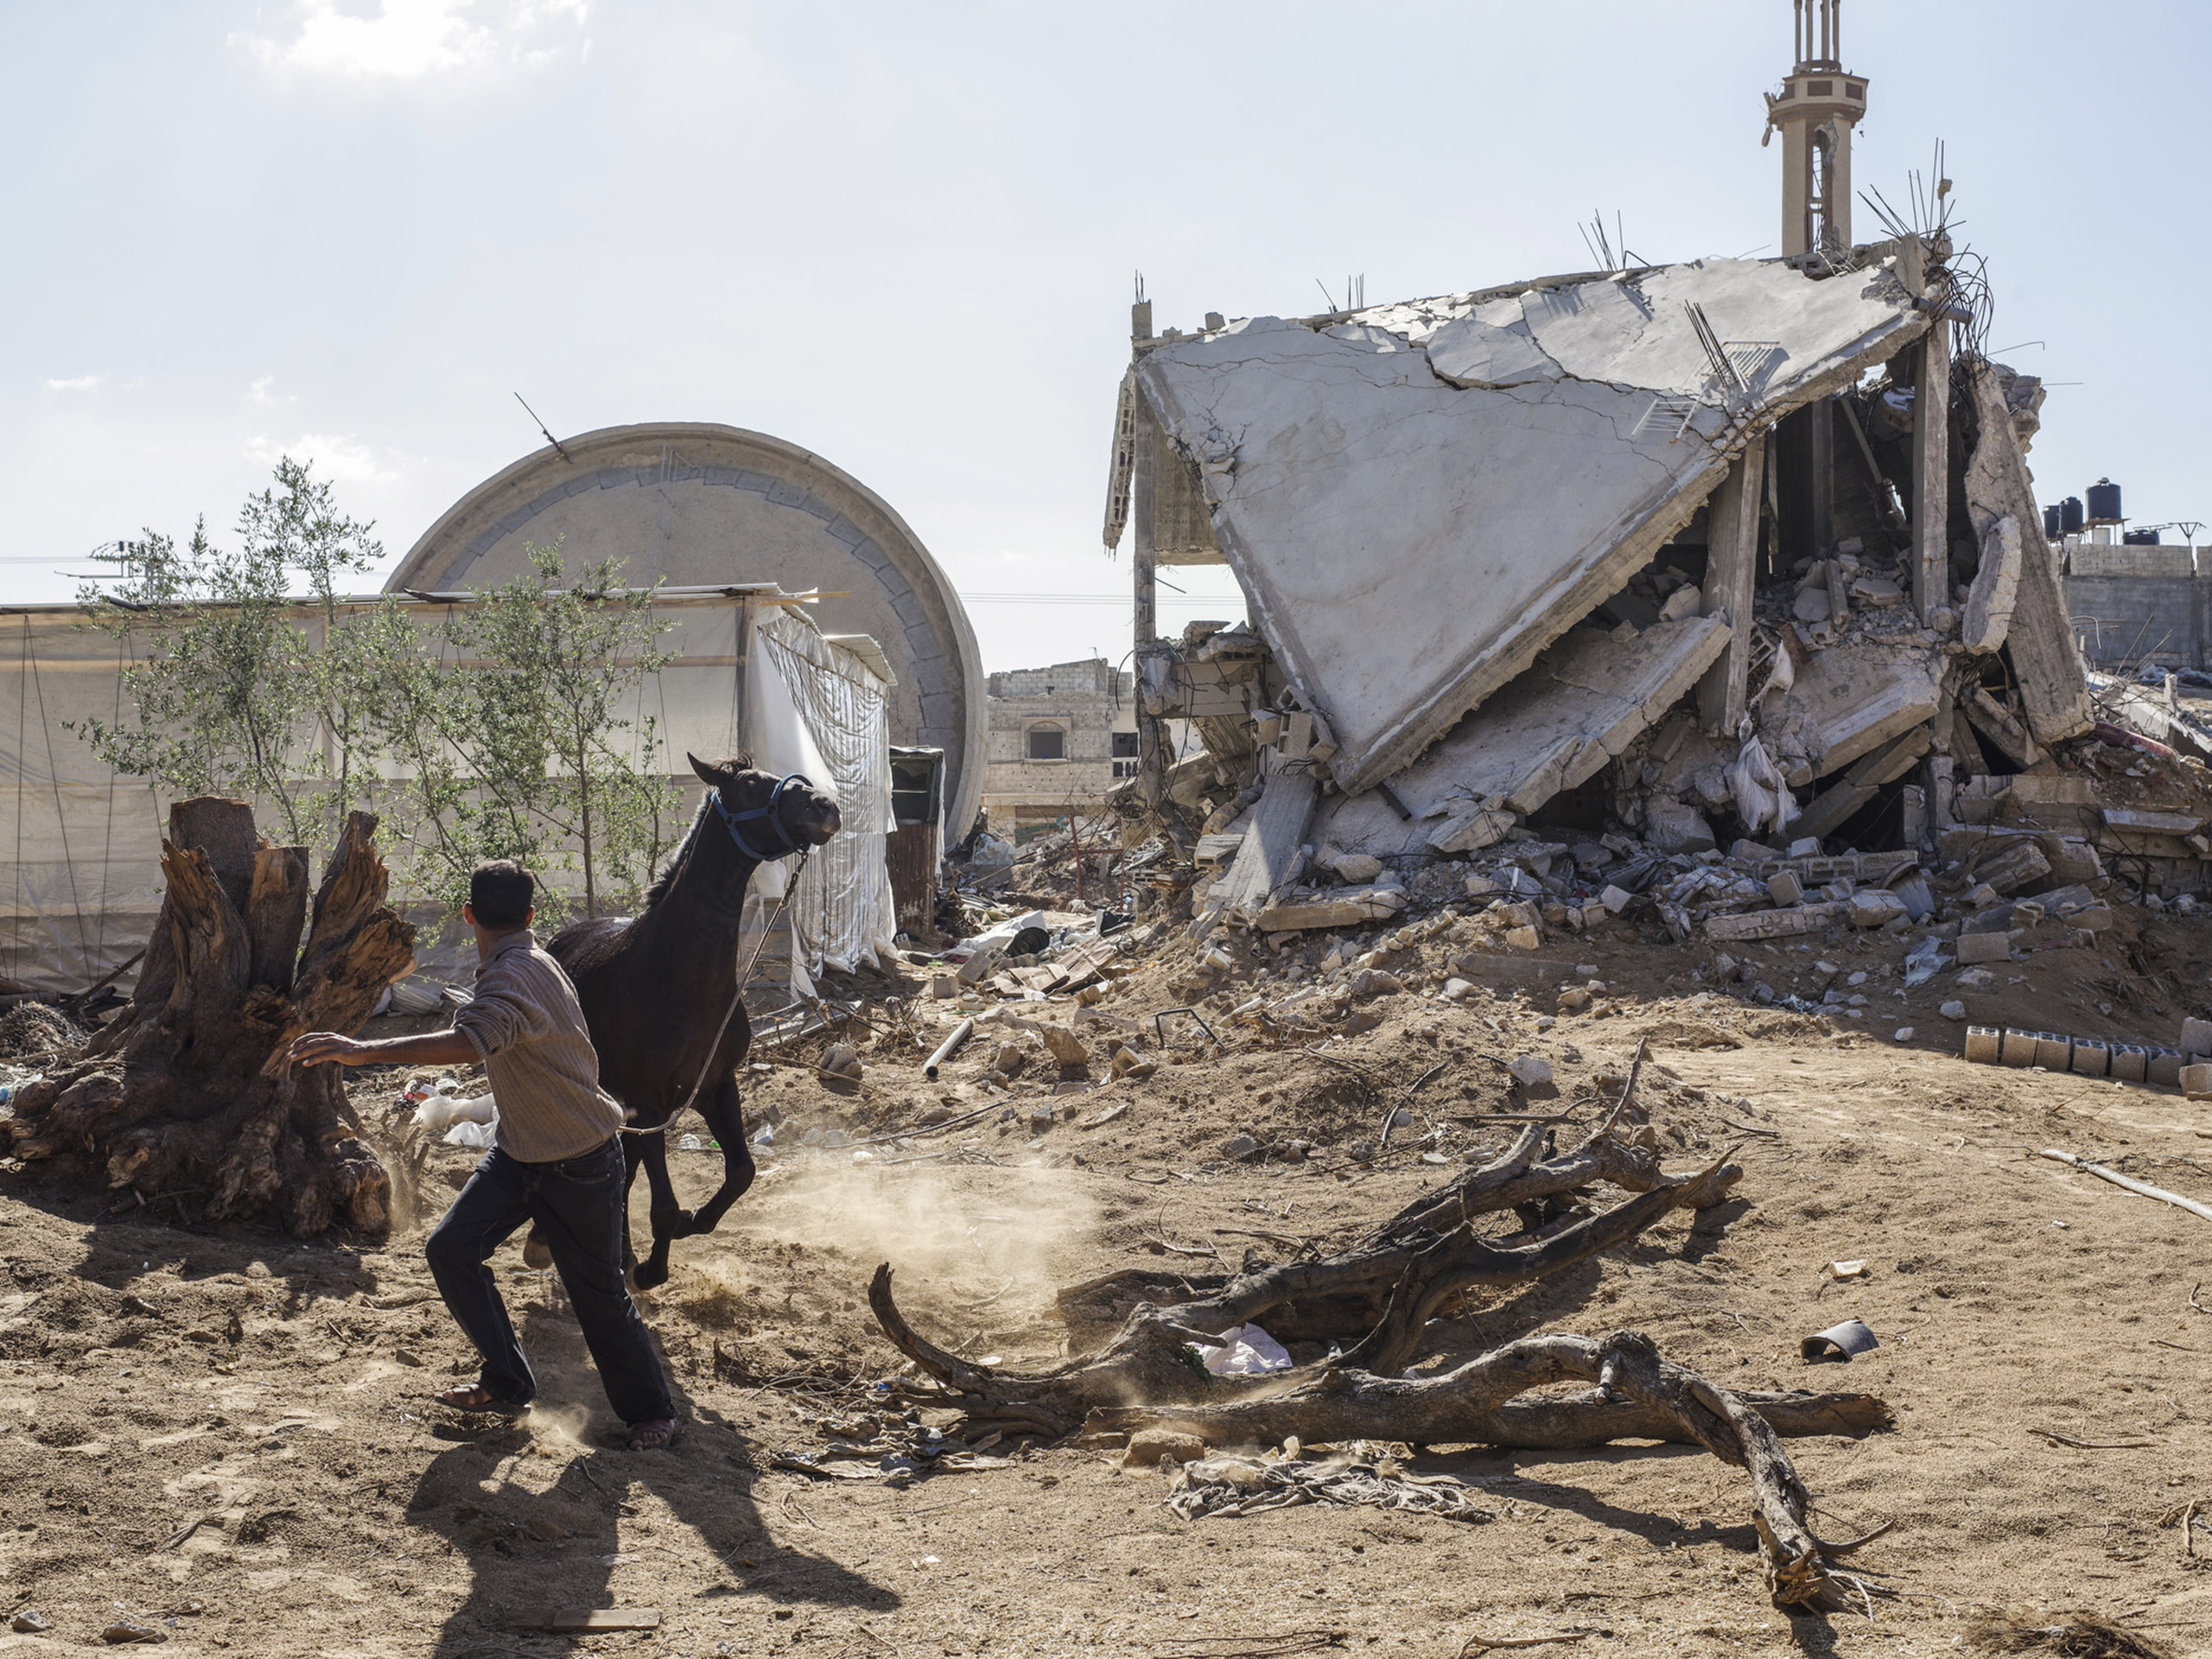 A runaway horse is seen near a destroyed mosque in southern Gaza.